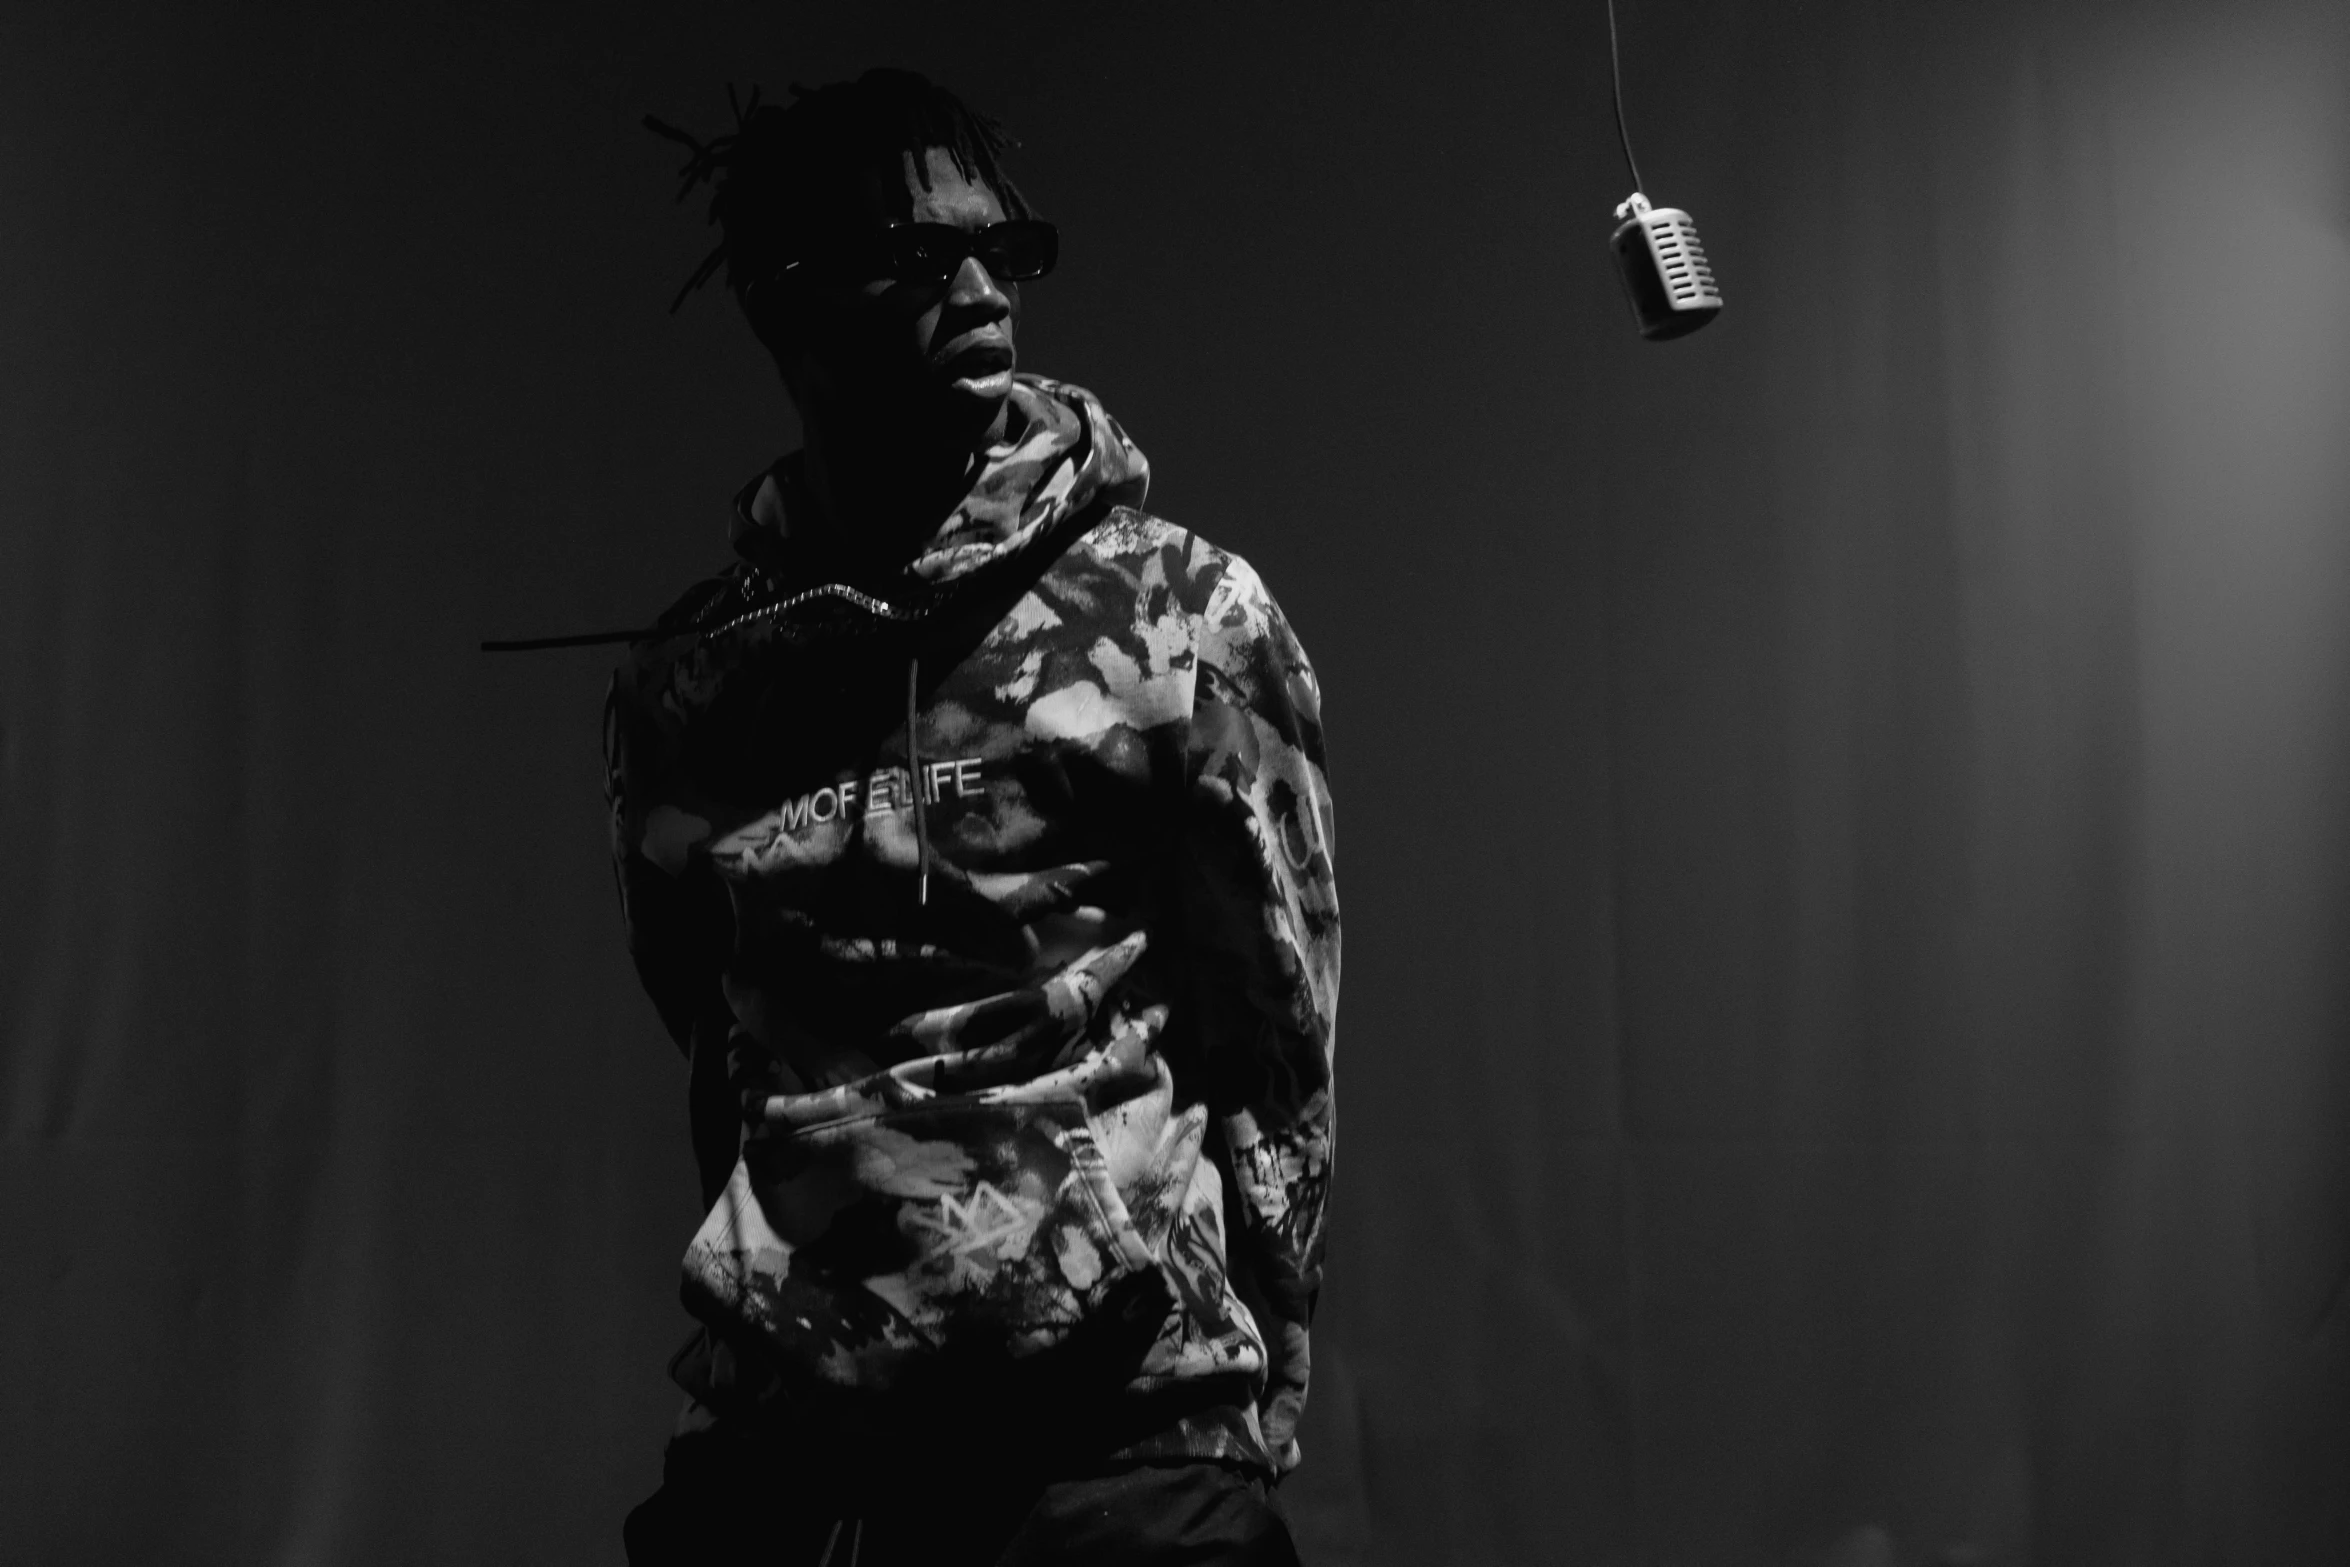 a man that is standing in the dark, an album cover, unsplash, visual art, young thug, monochrome:-2, wearing camo, live performance